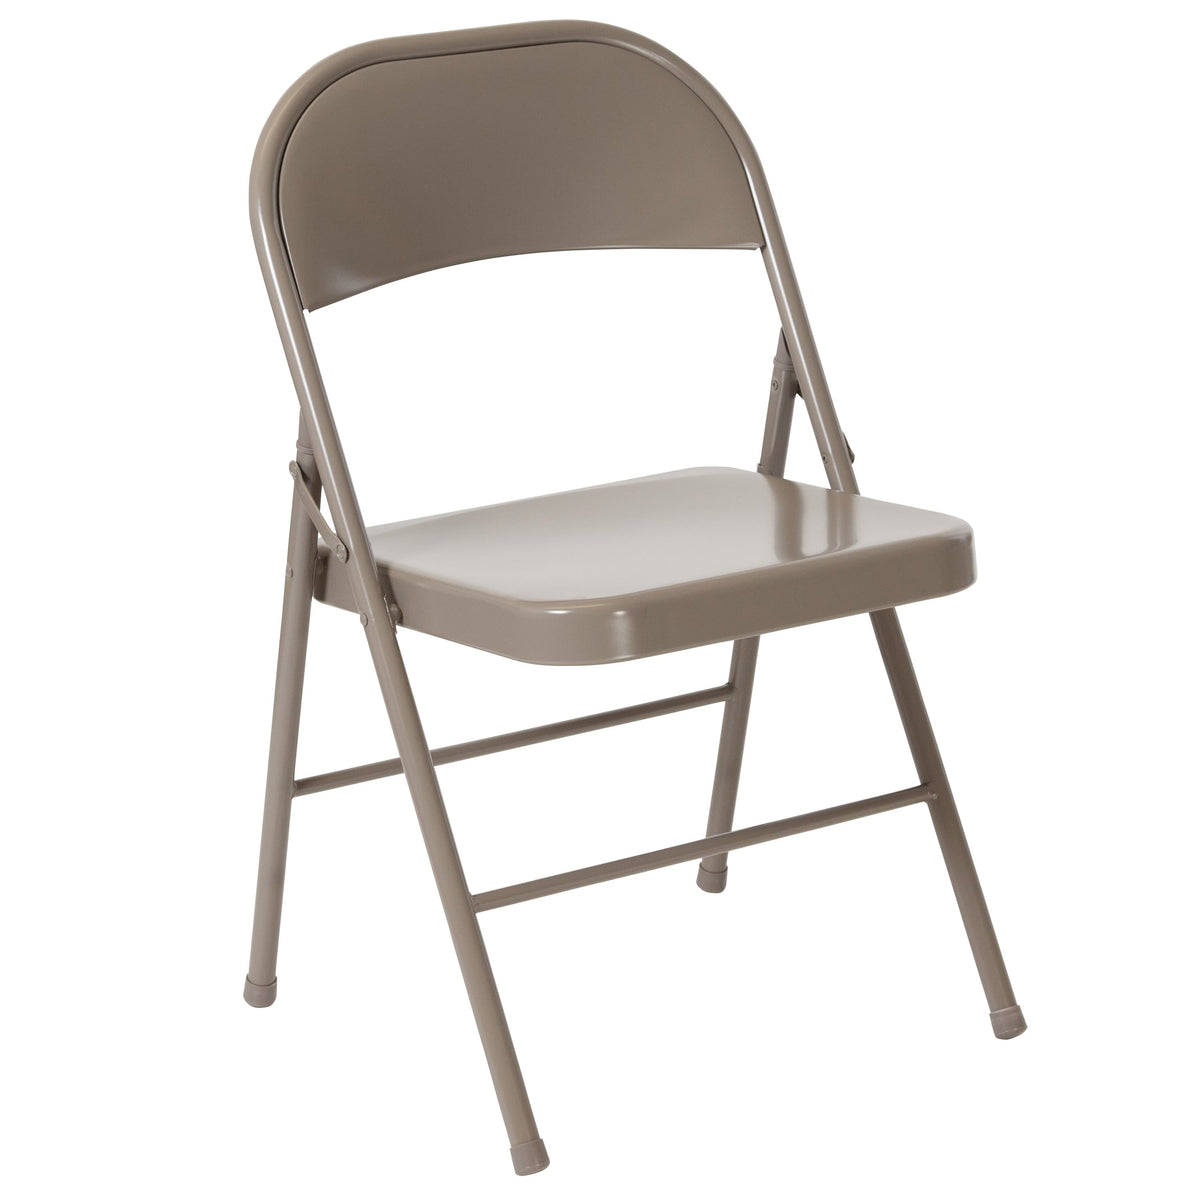 Gray |#| Double Braced Gray Metal Folding Chair - Event Chair - Portable Chair